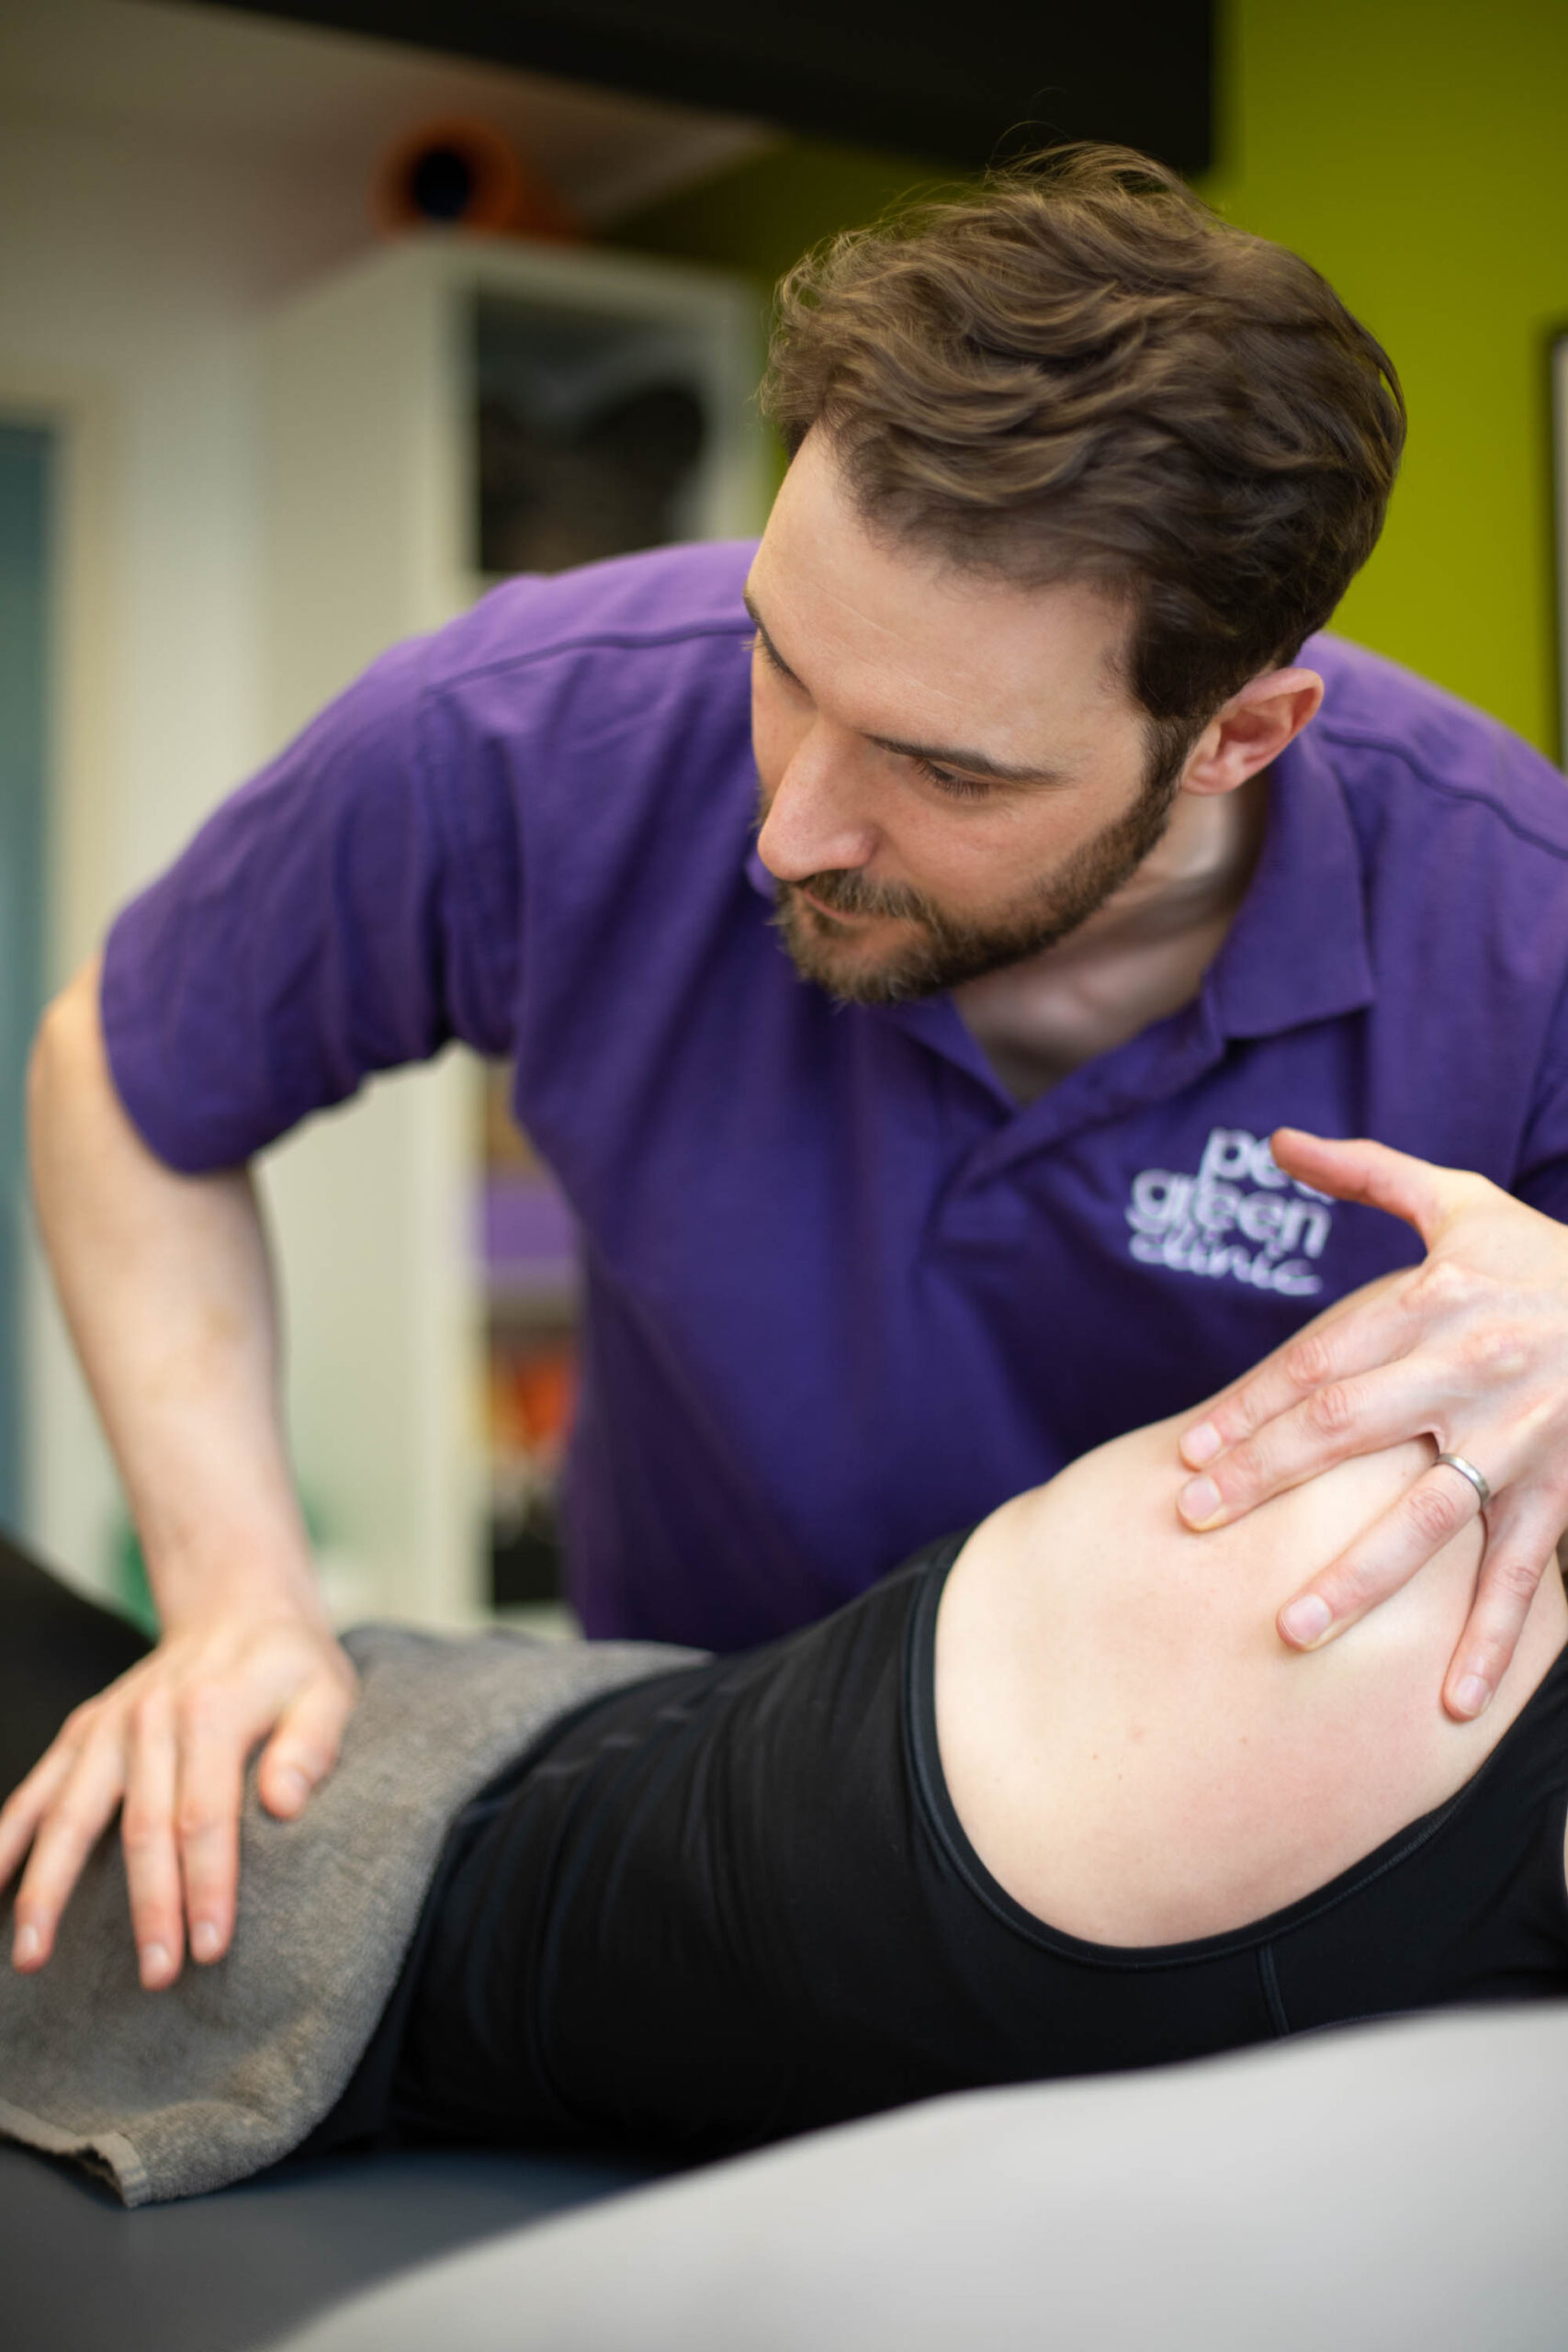 Osteopath / Chiropractor BSc or MSc (hons) MCSP HCPC